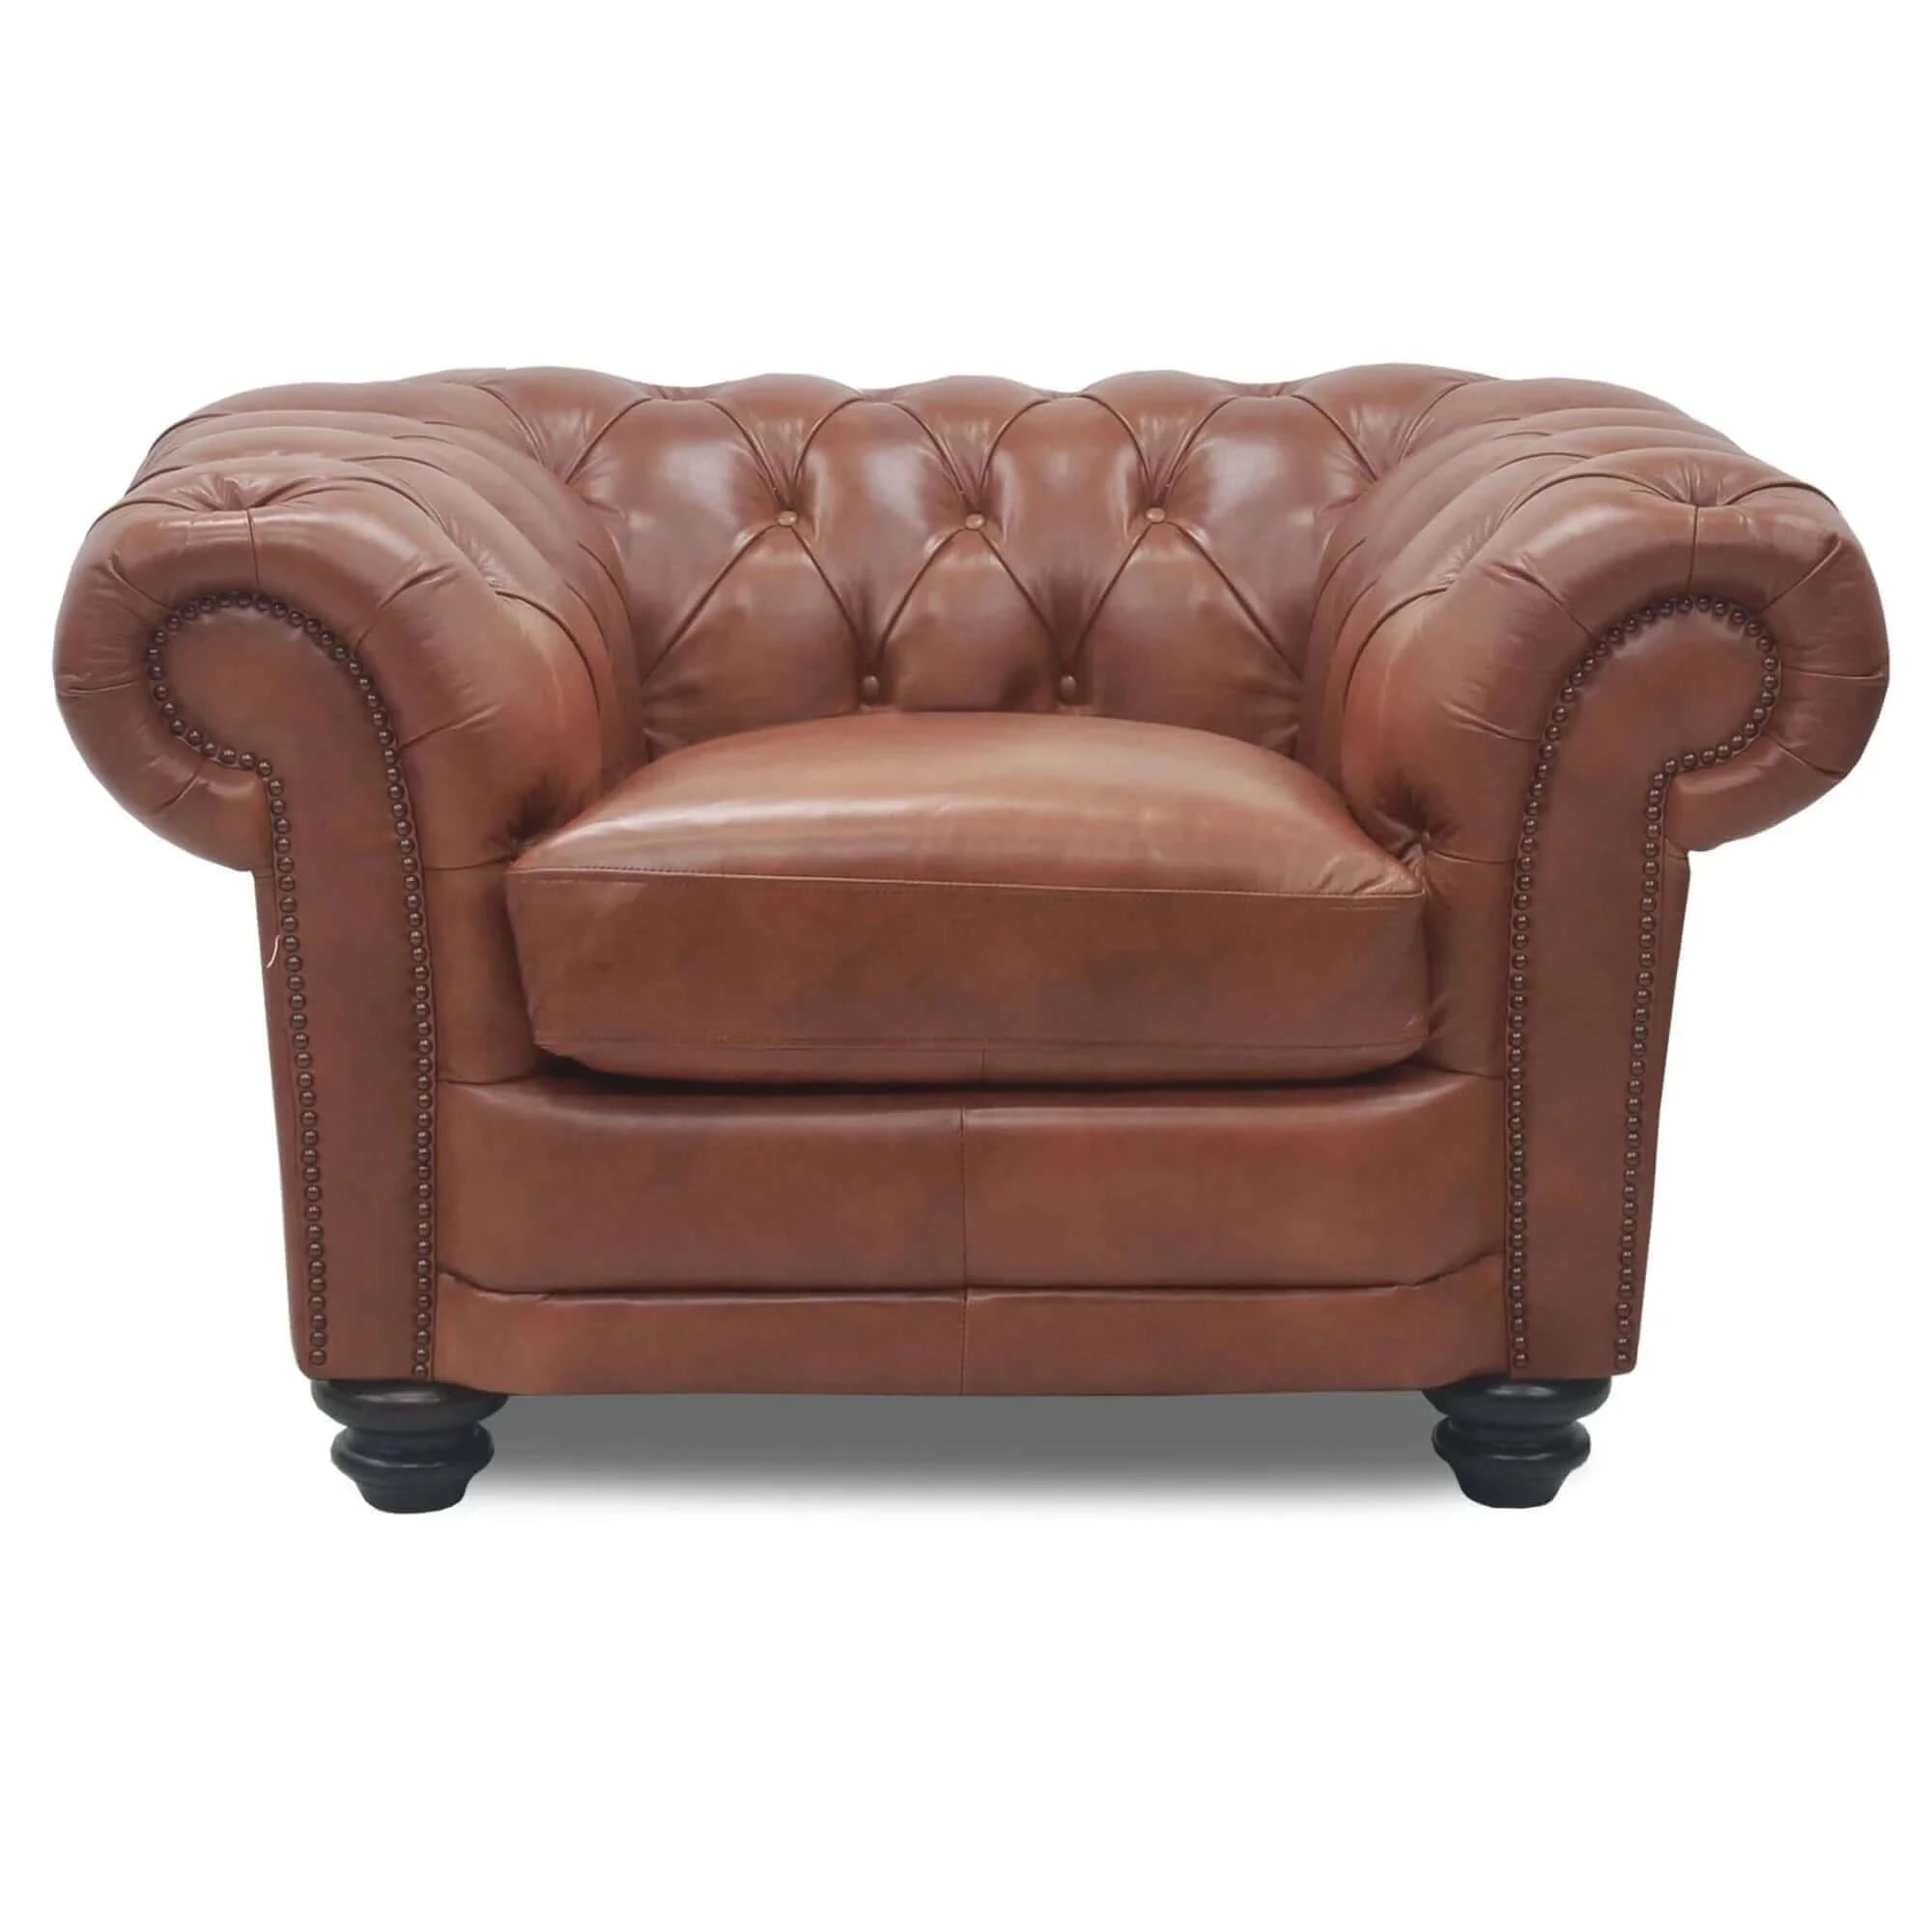 Buy sonny 3+2.5+1 seater genuine leather sofa chestfield lounge couch - butterscotch - upinteriors-Upinteriors